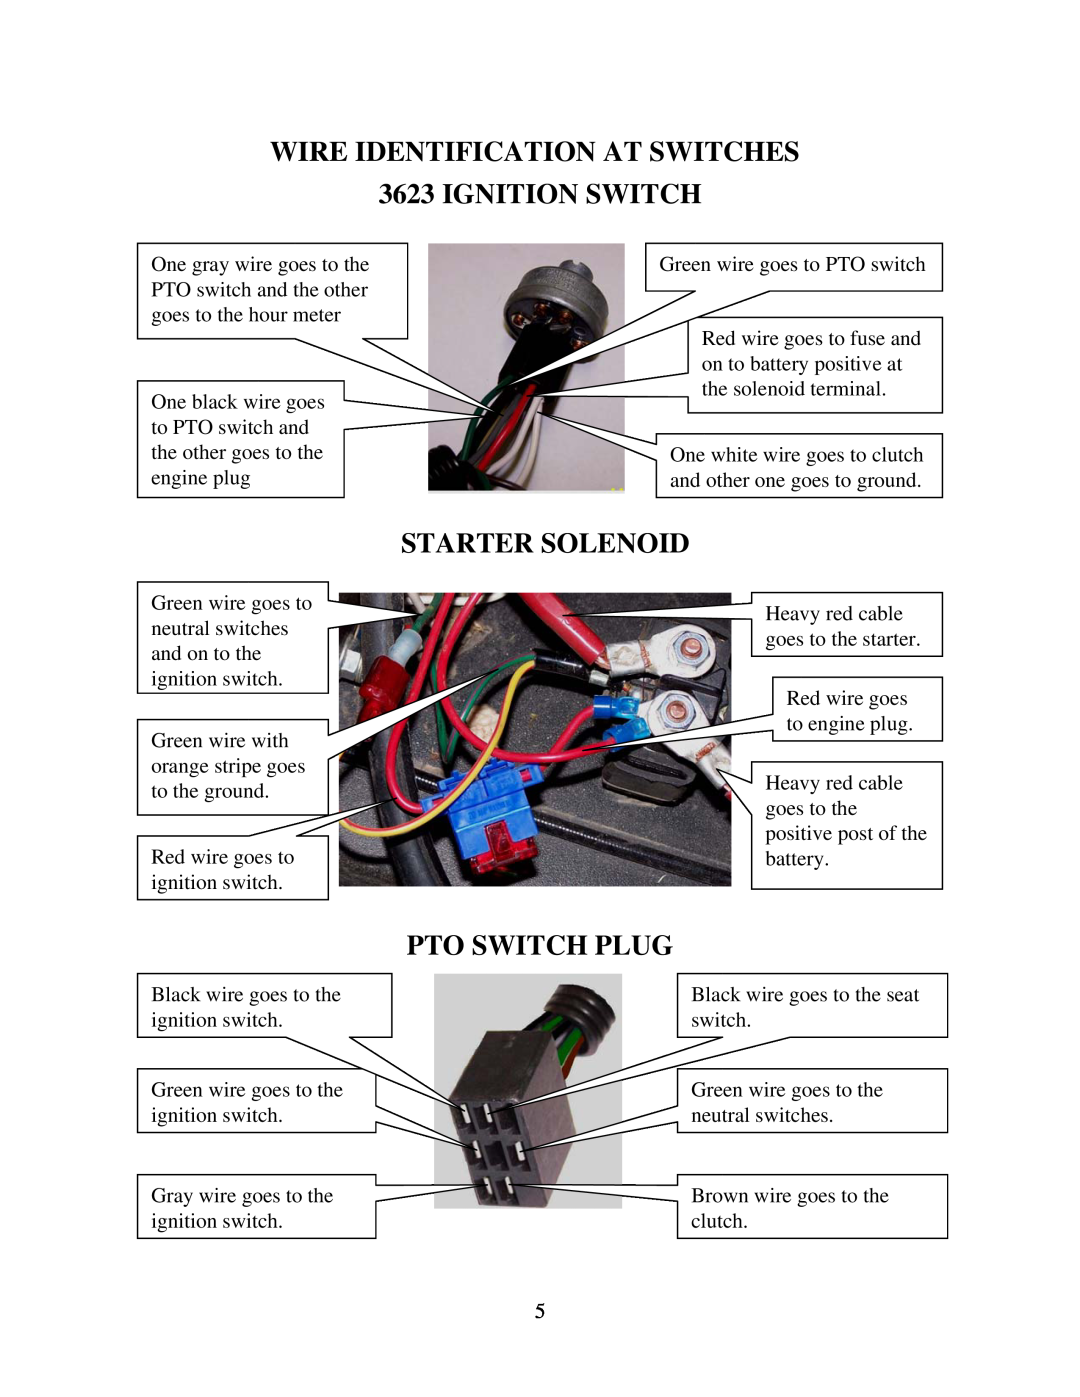 Swisher ZT2560 manual Wire Identification At Switches, Ignition Switch, Starter Solenoid, Pto Switch Plug 